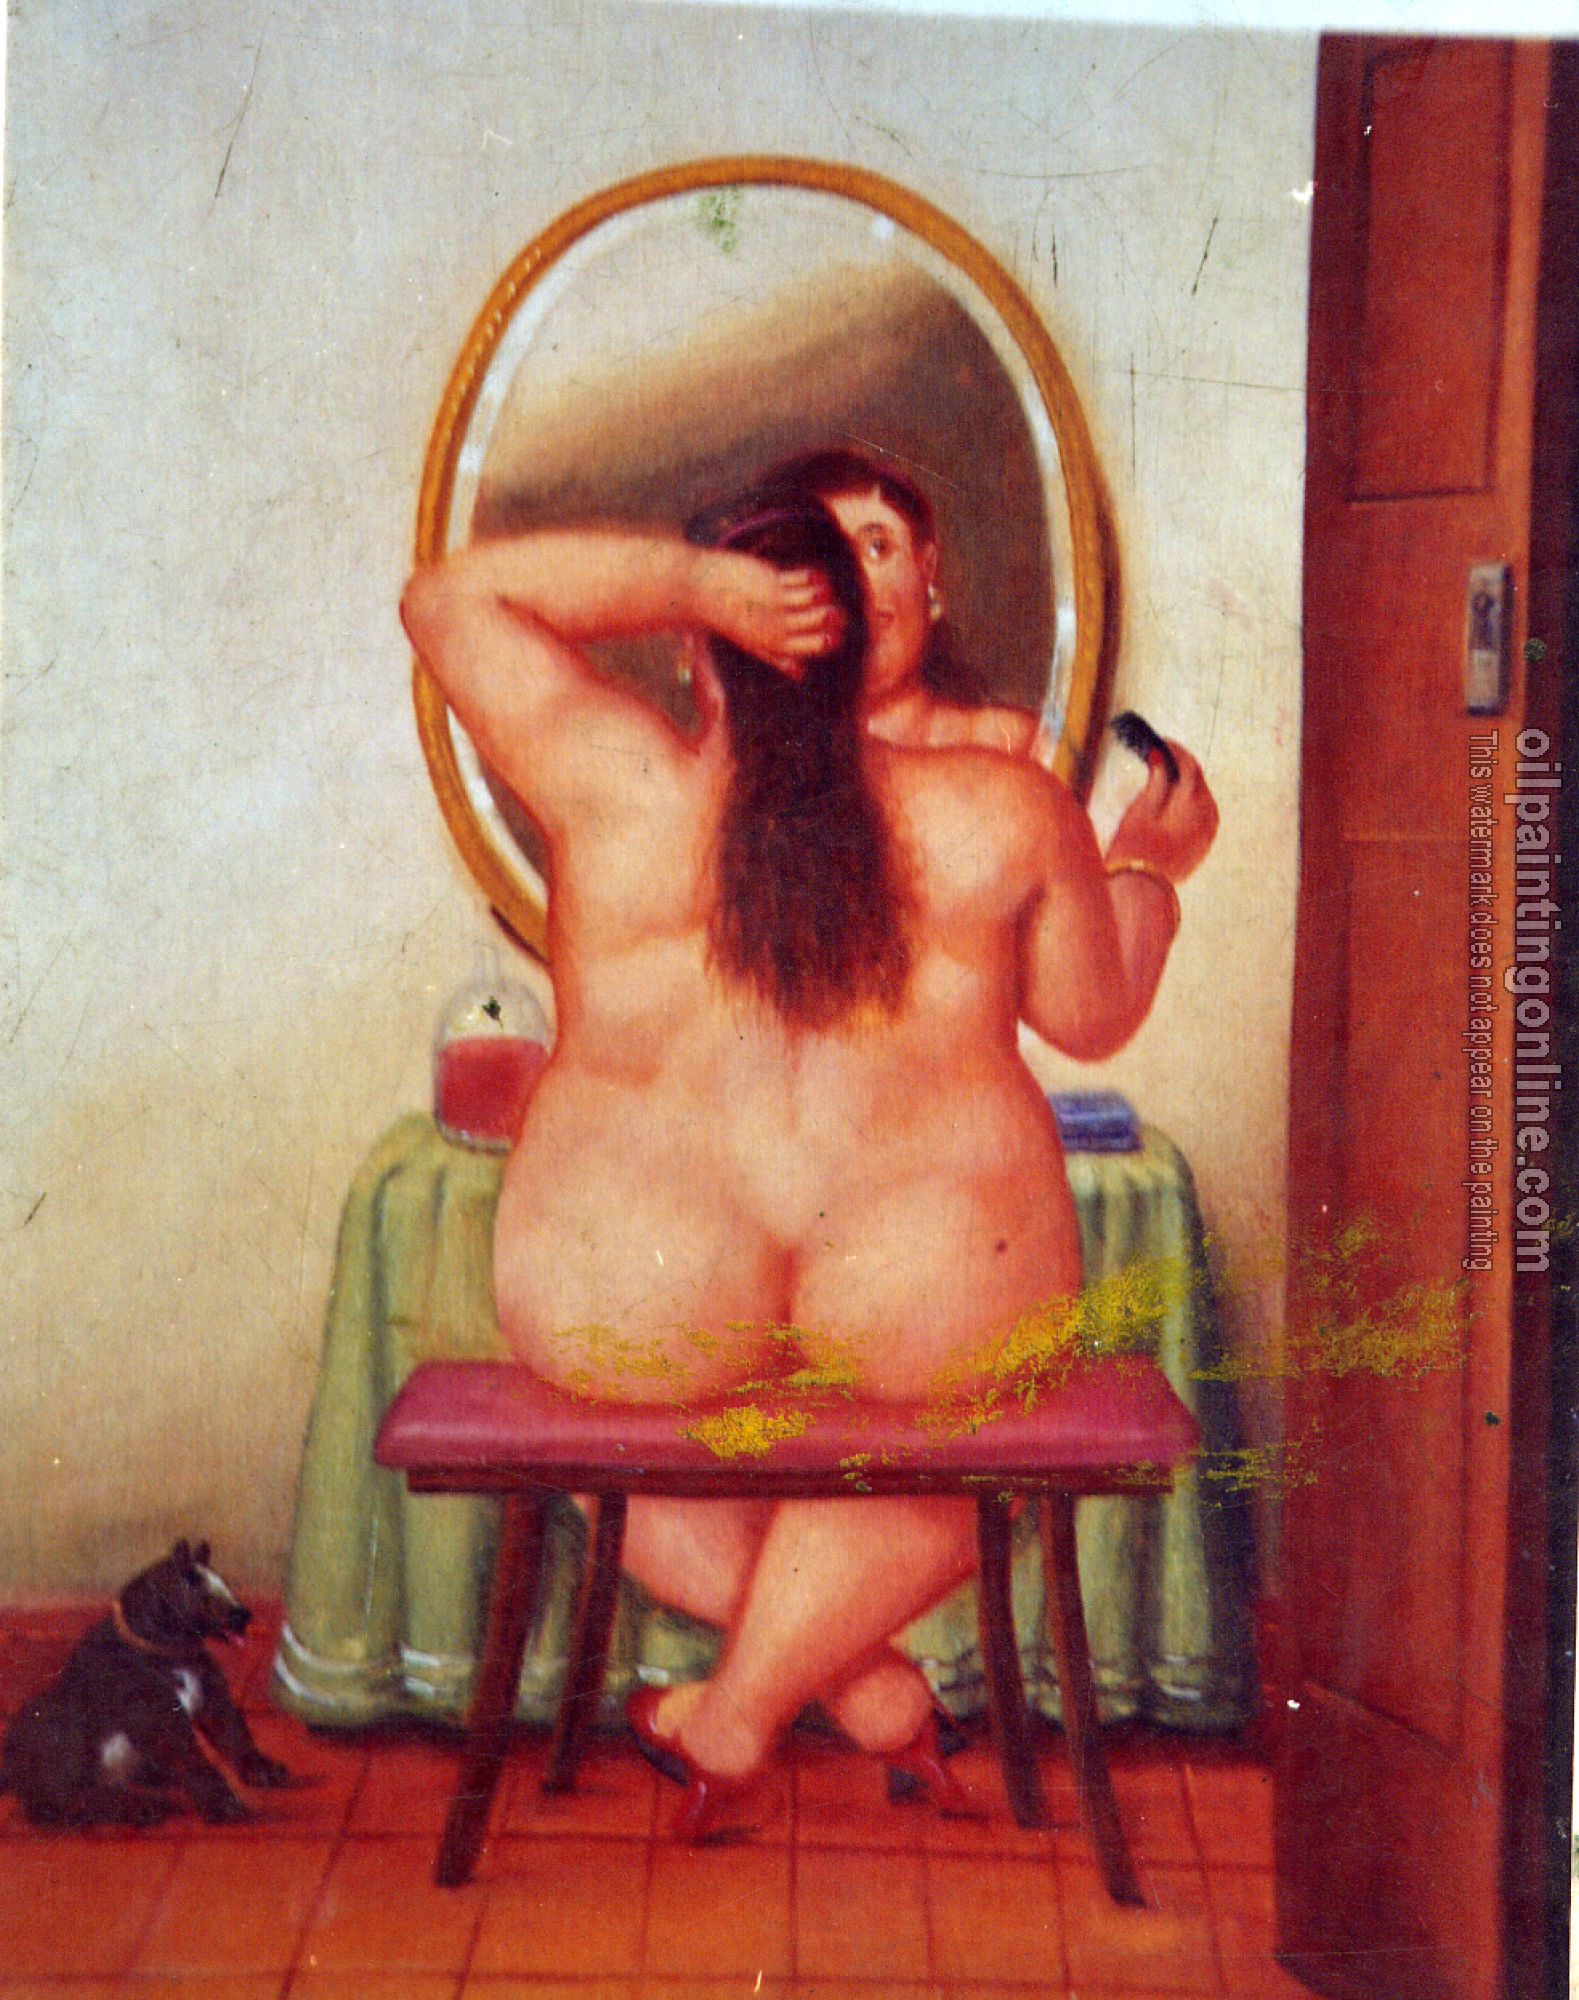 Botero, Fernando - Abstract oil painting.